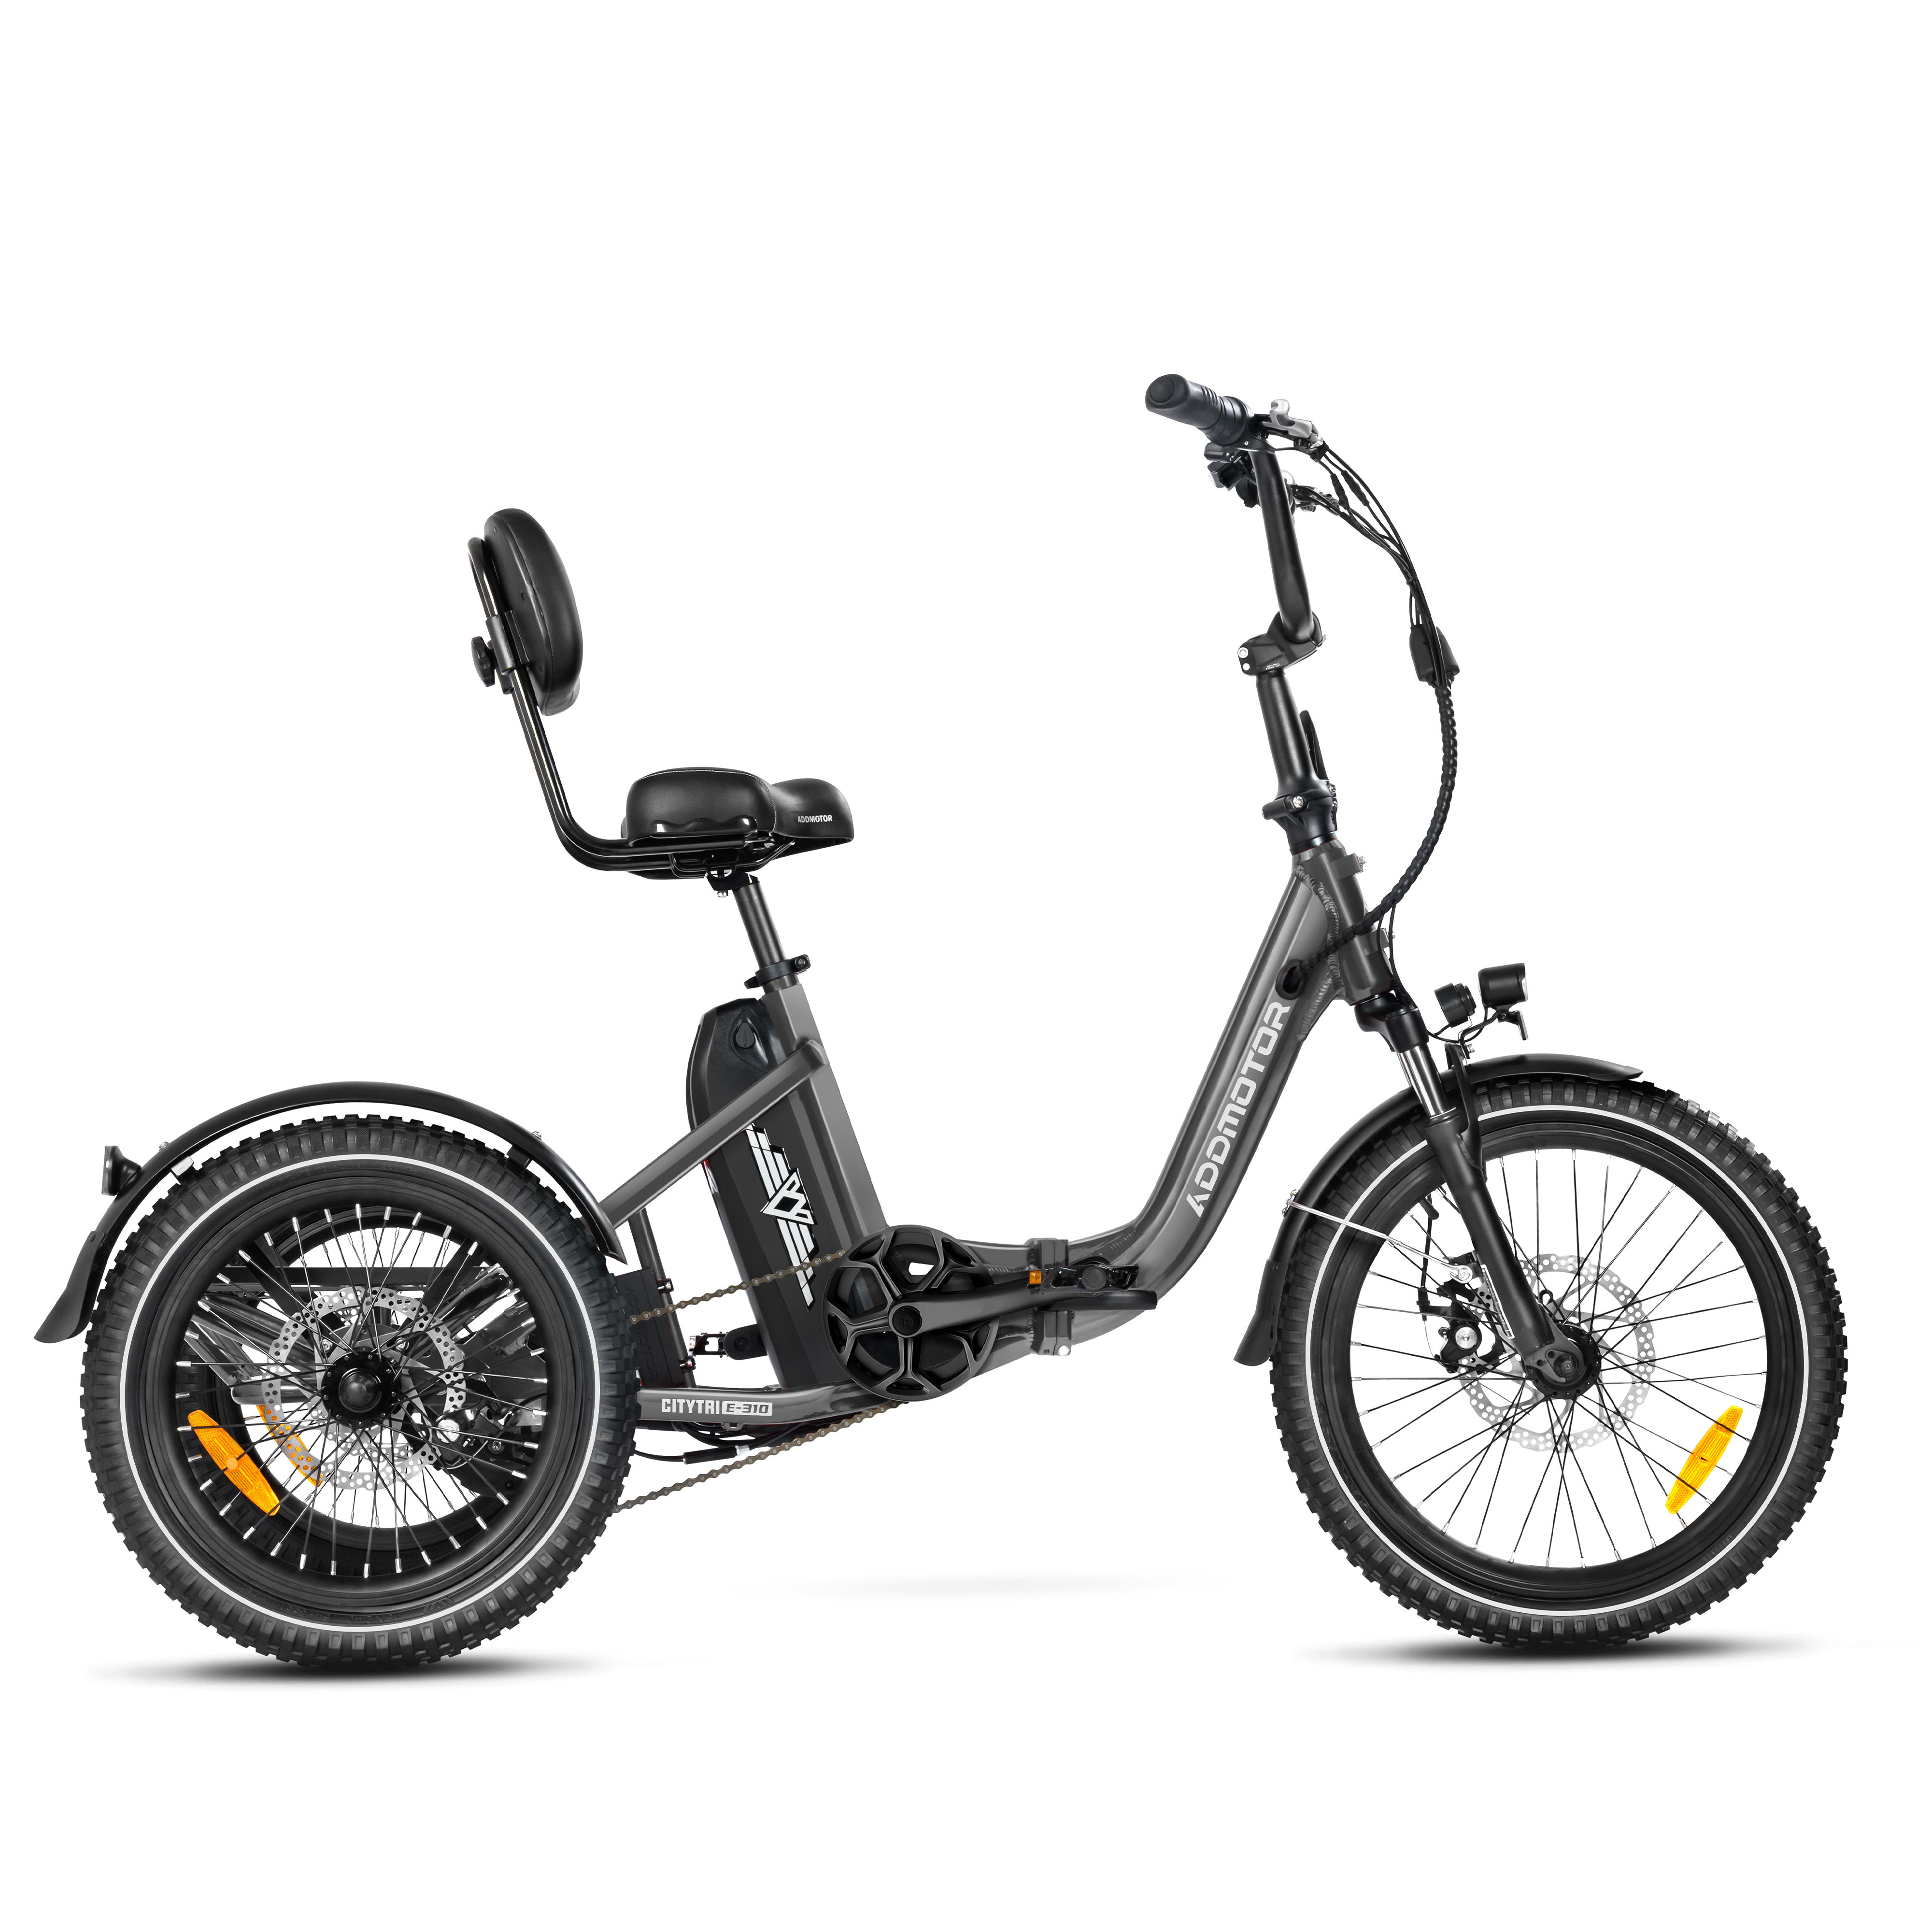 Addmotor Citytri E-310 750W Electric Trike for Adults Best Electric Tricycle Under $2000 Up To 91 Miles - Candy Red